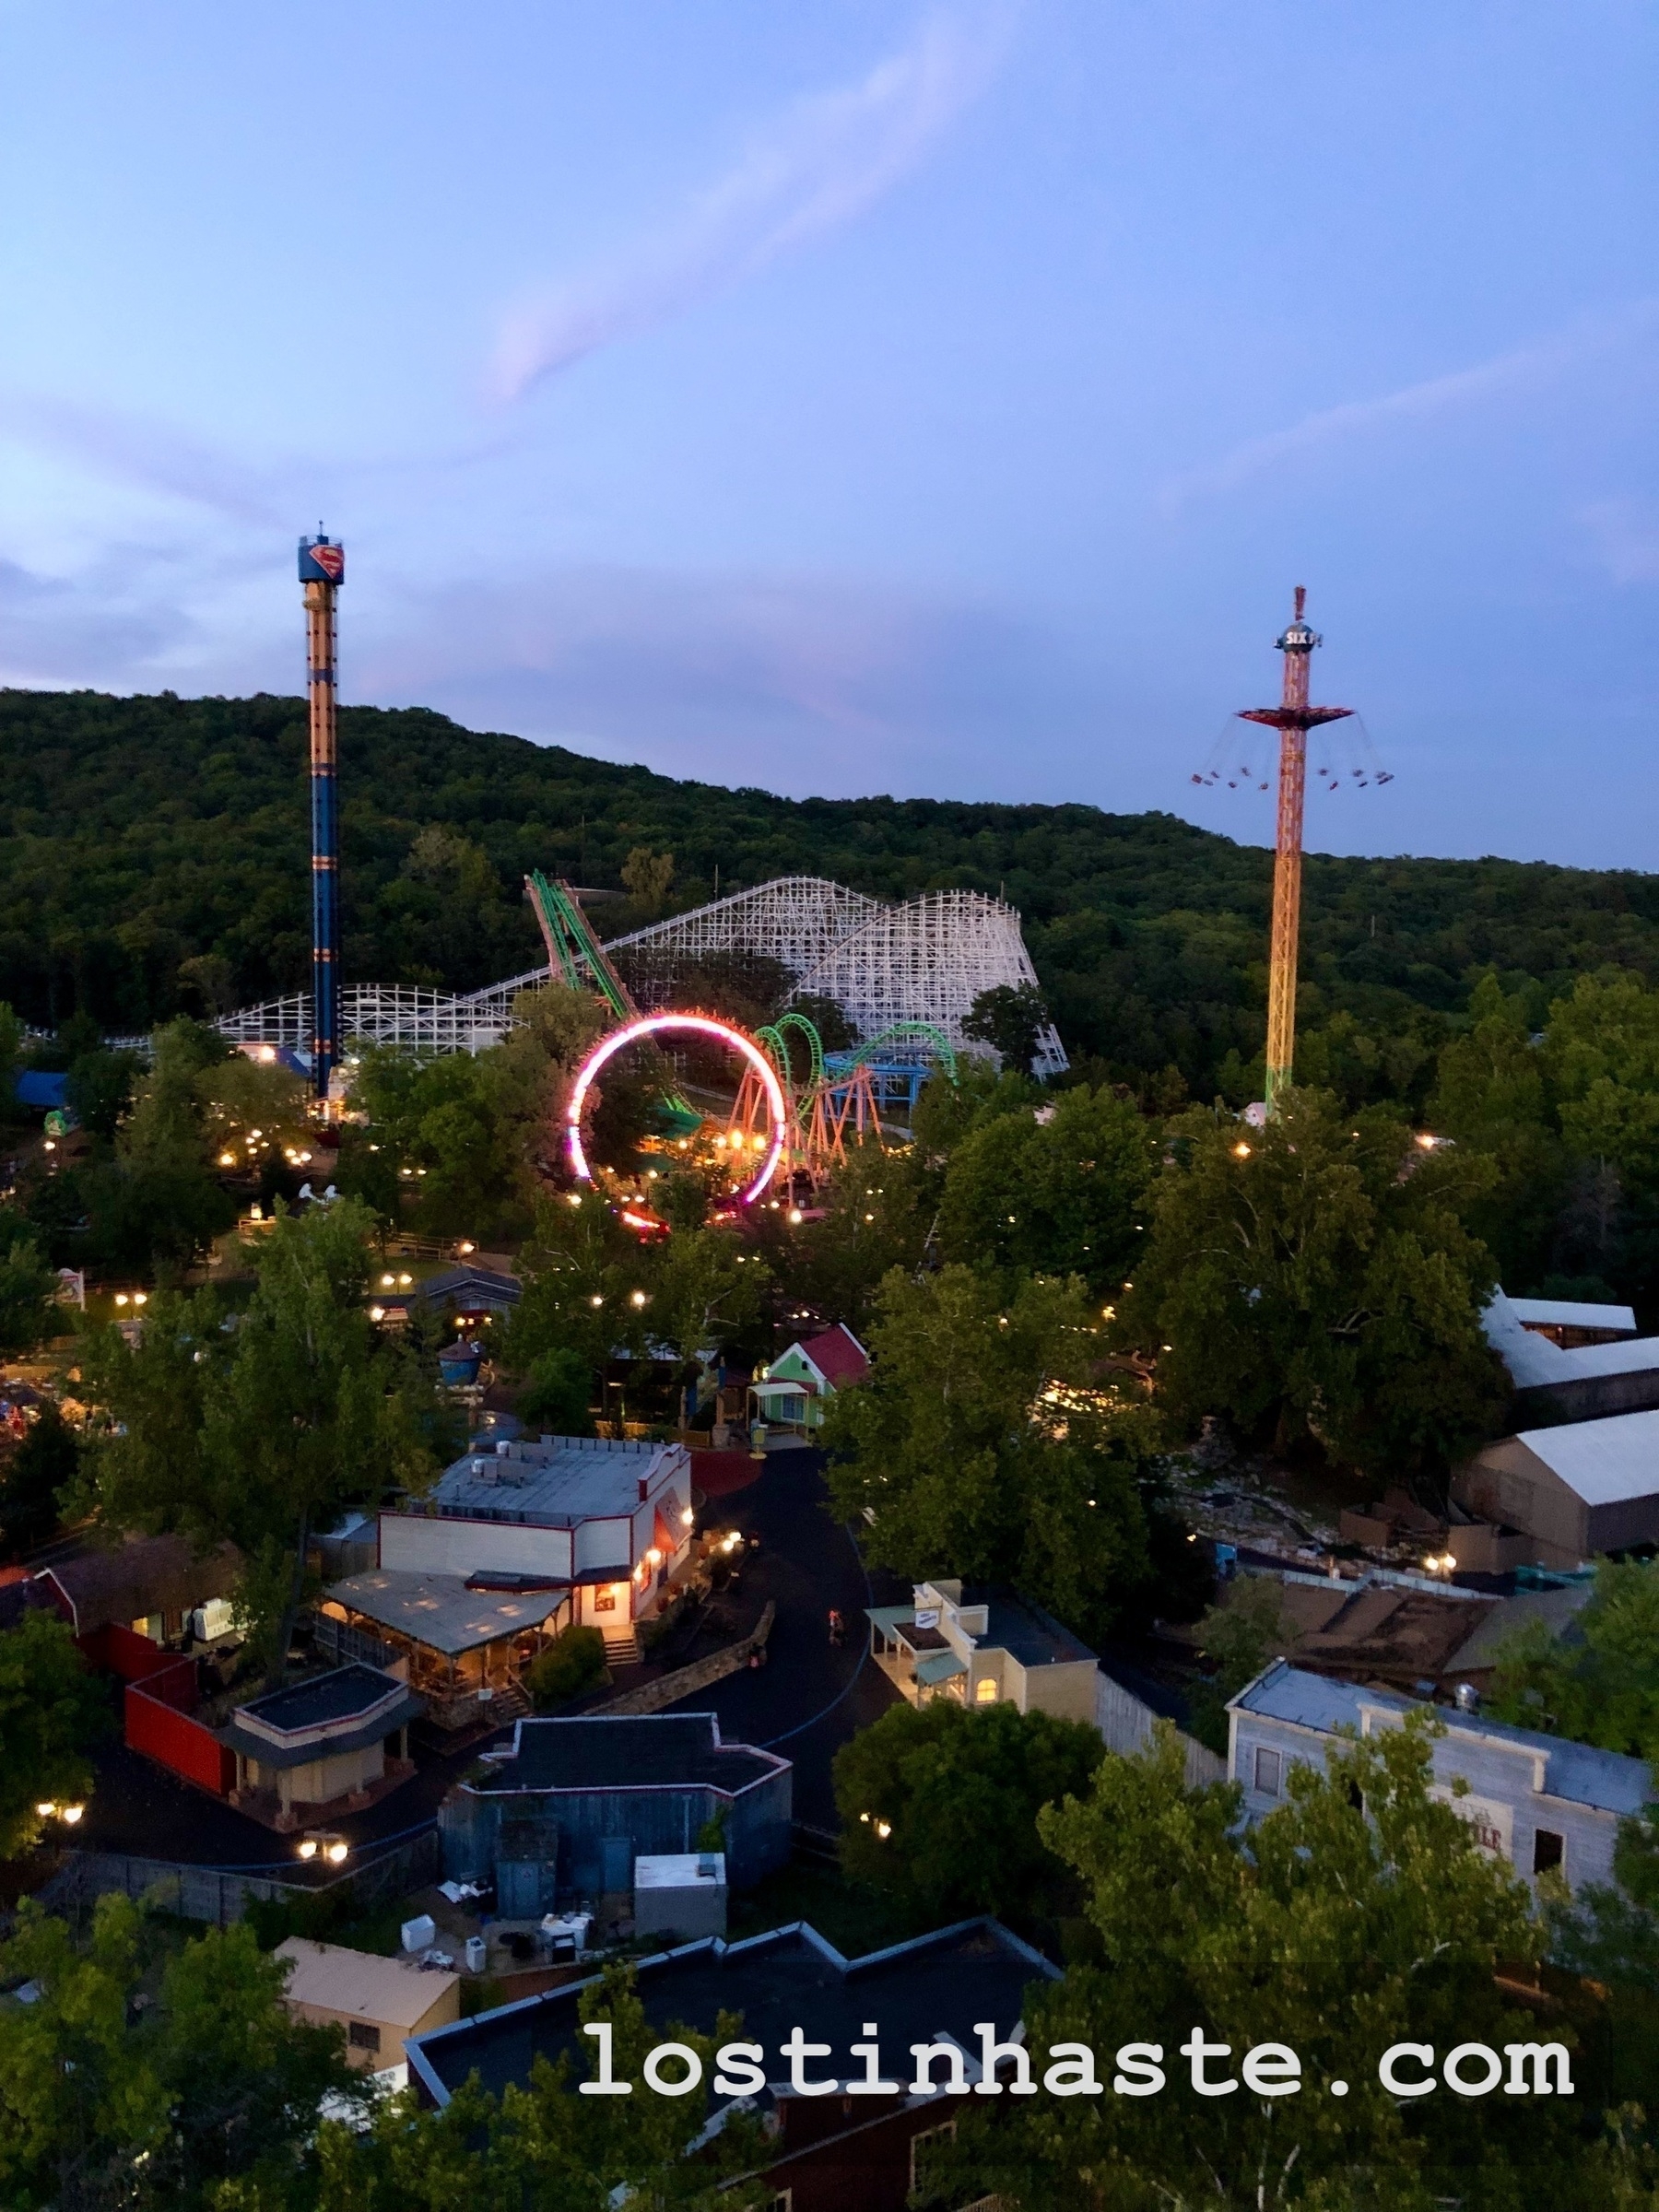 An amusement park at dusk featuring a lit Ferris wheel and roller coaster surrounded by trees.